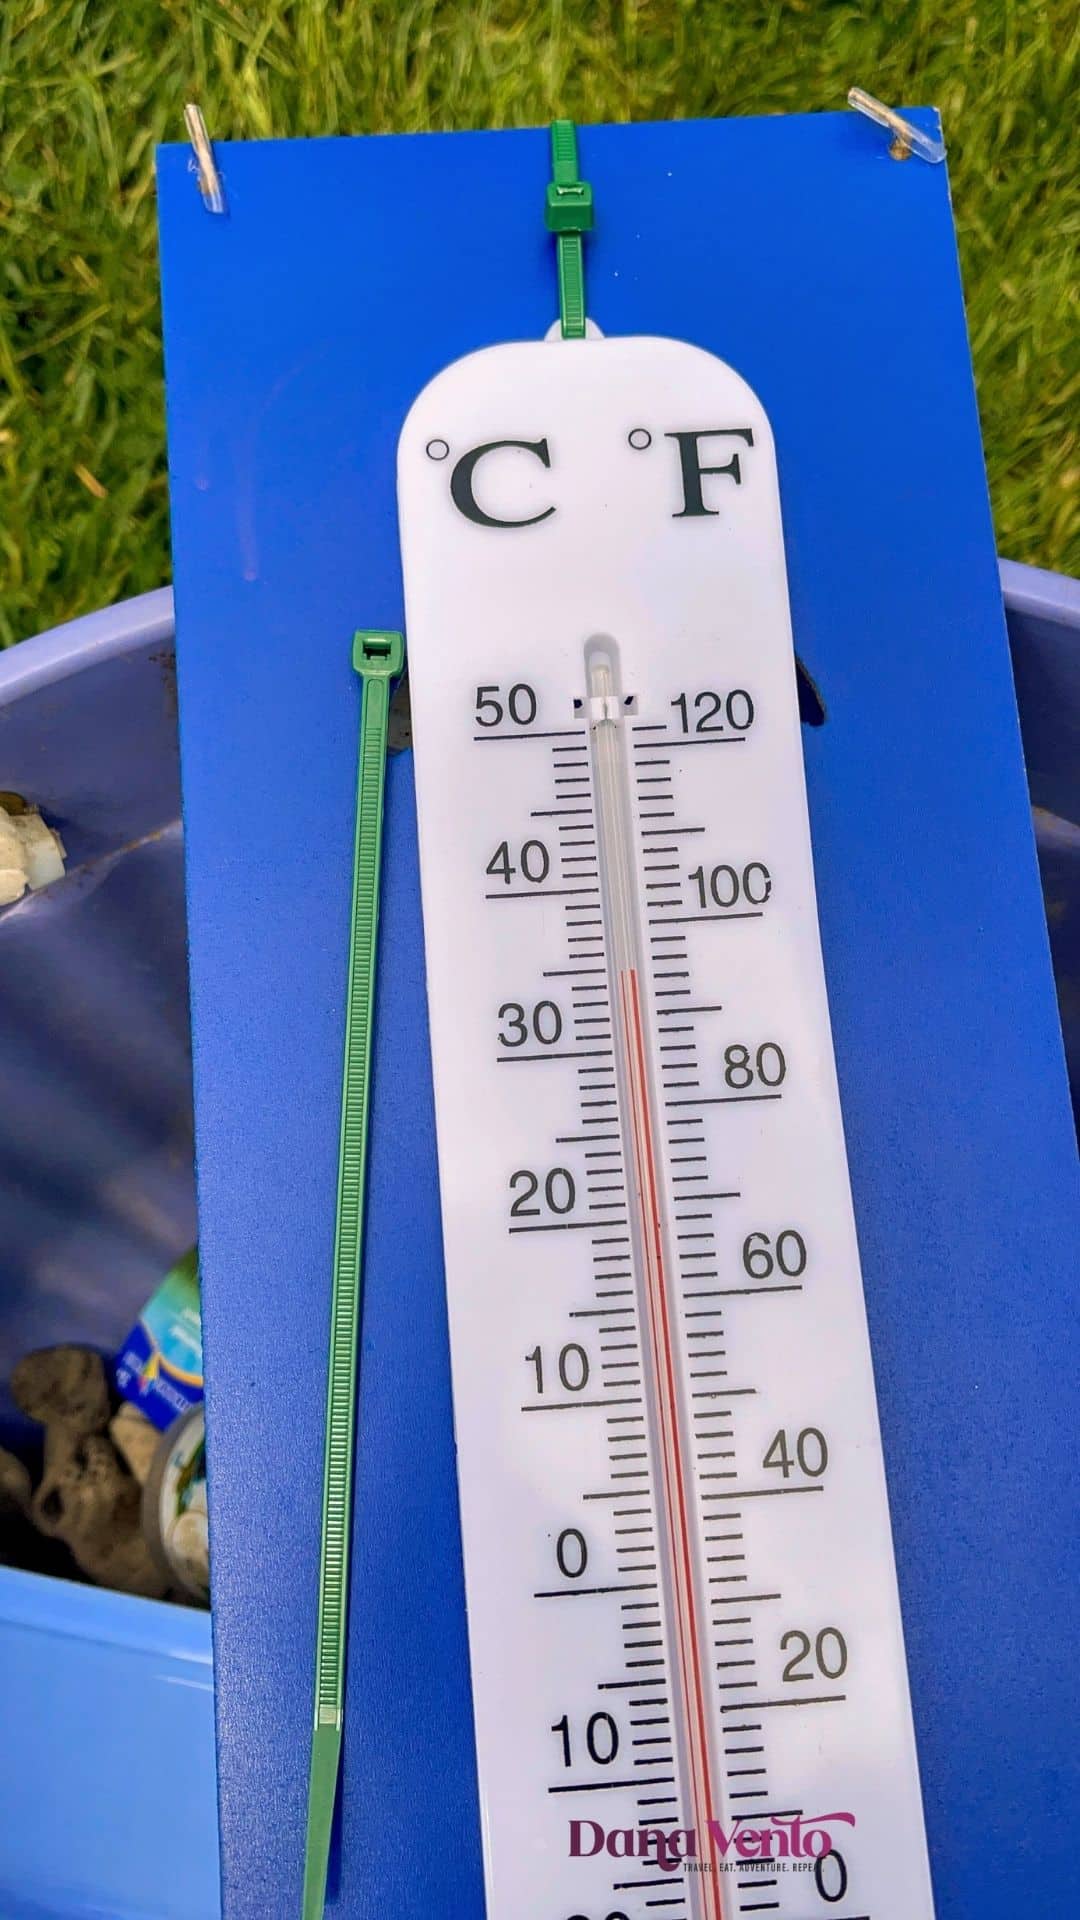 Materials needed to make the garden thermometer